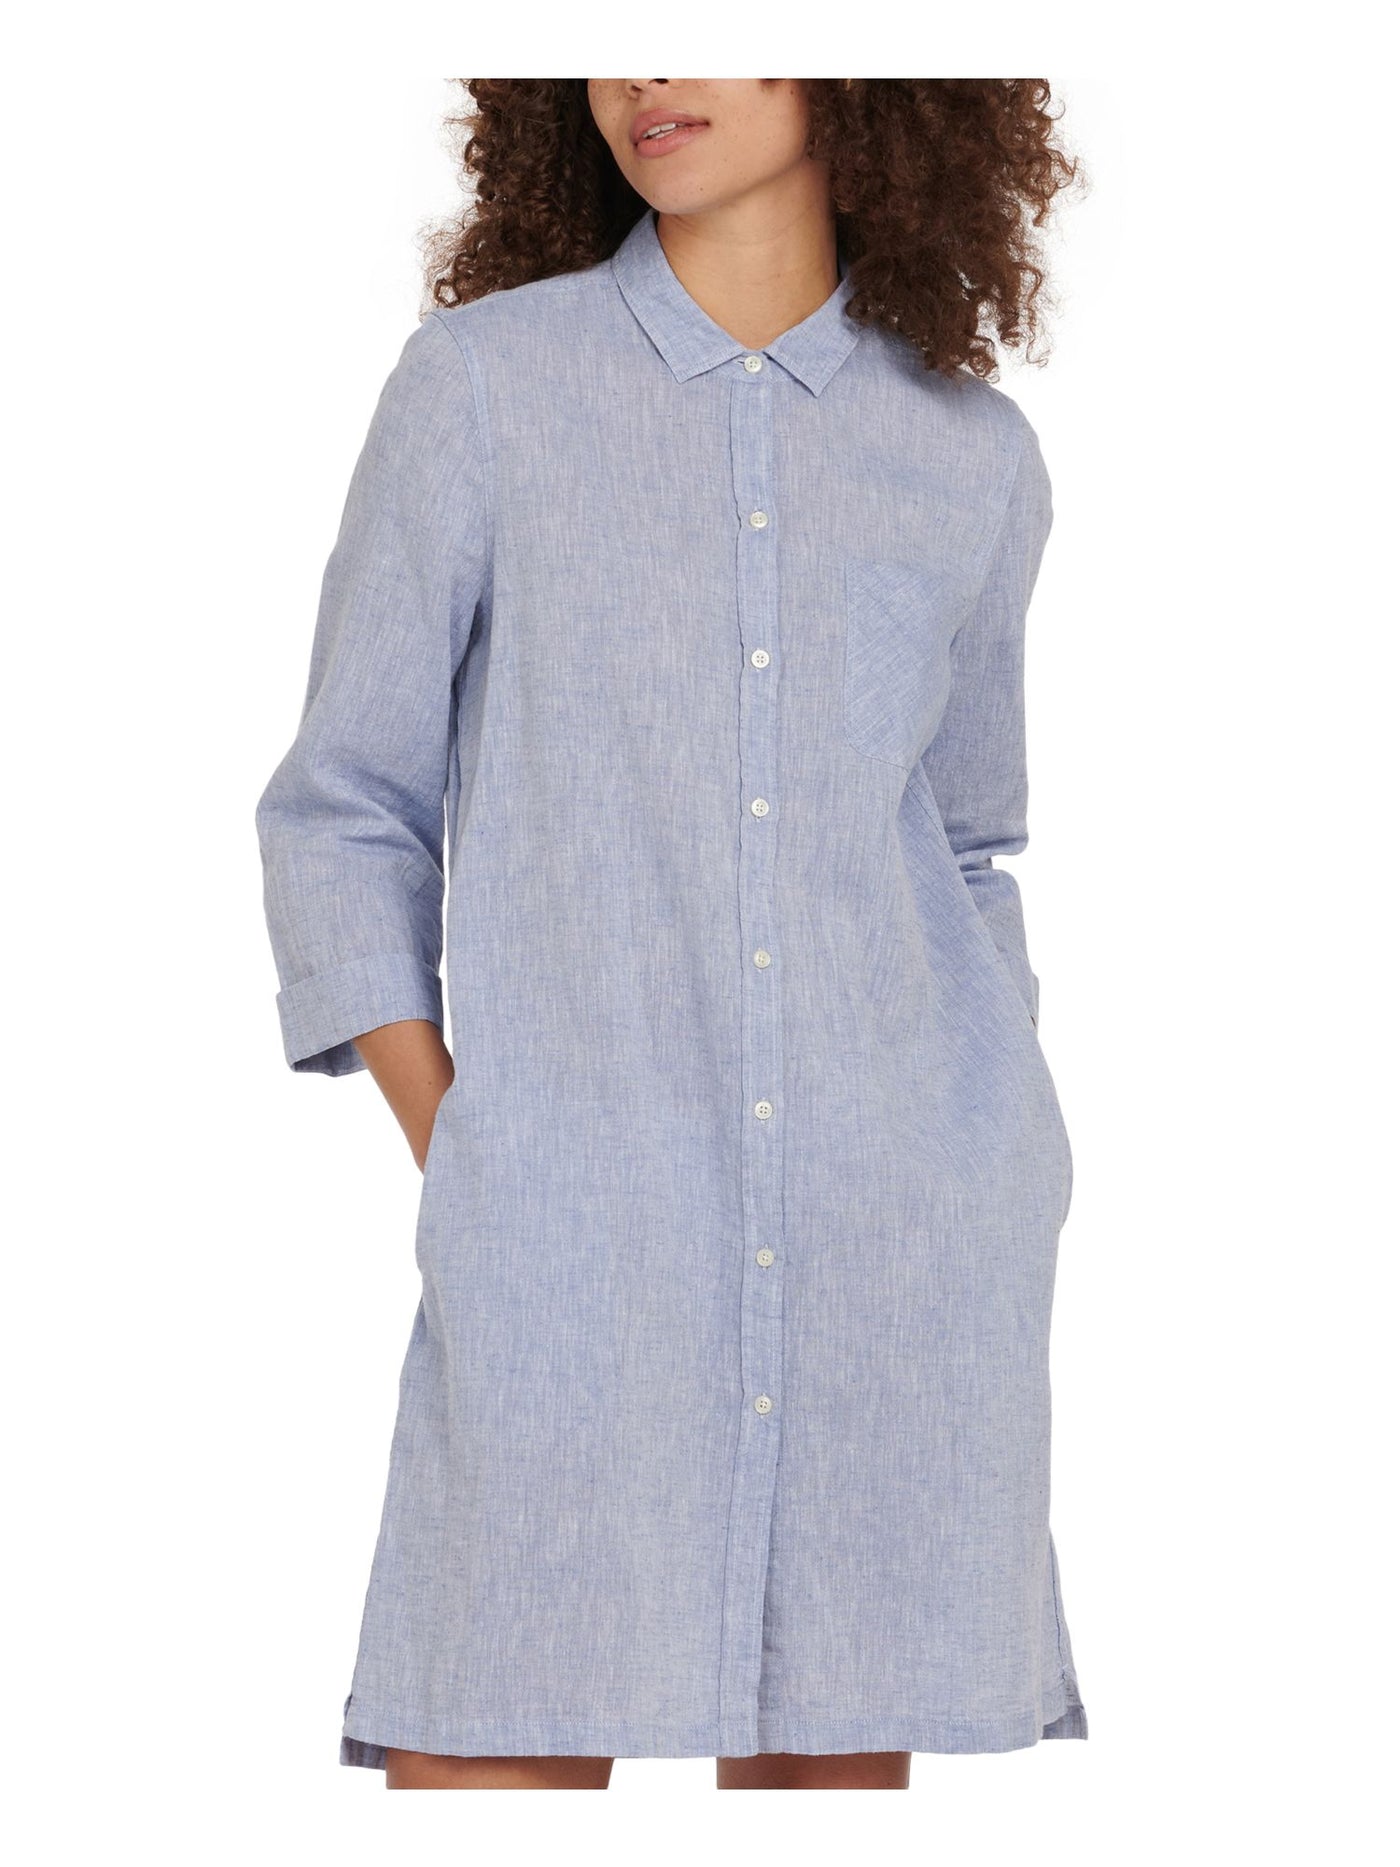 BARBOUR Womens Blue Cotton Blend Pocketed Heather Point Collar Above The Knee Shirt Dress 14